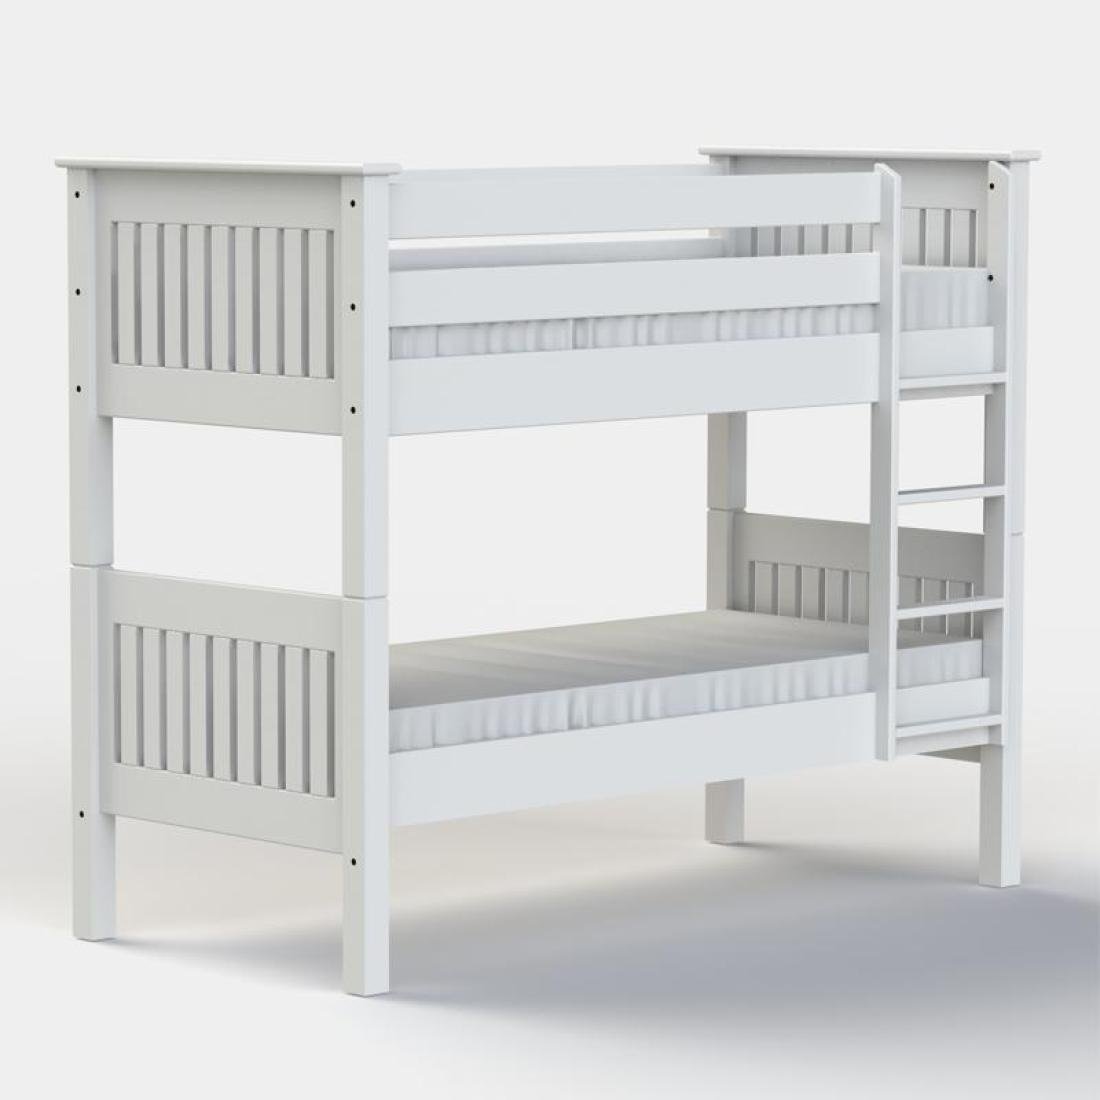 The Banbury Bunk Bed Childrens, Crib Bunk Bed Combination